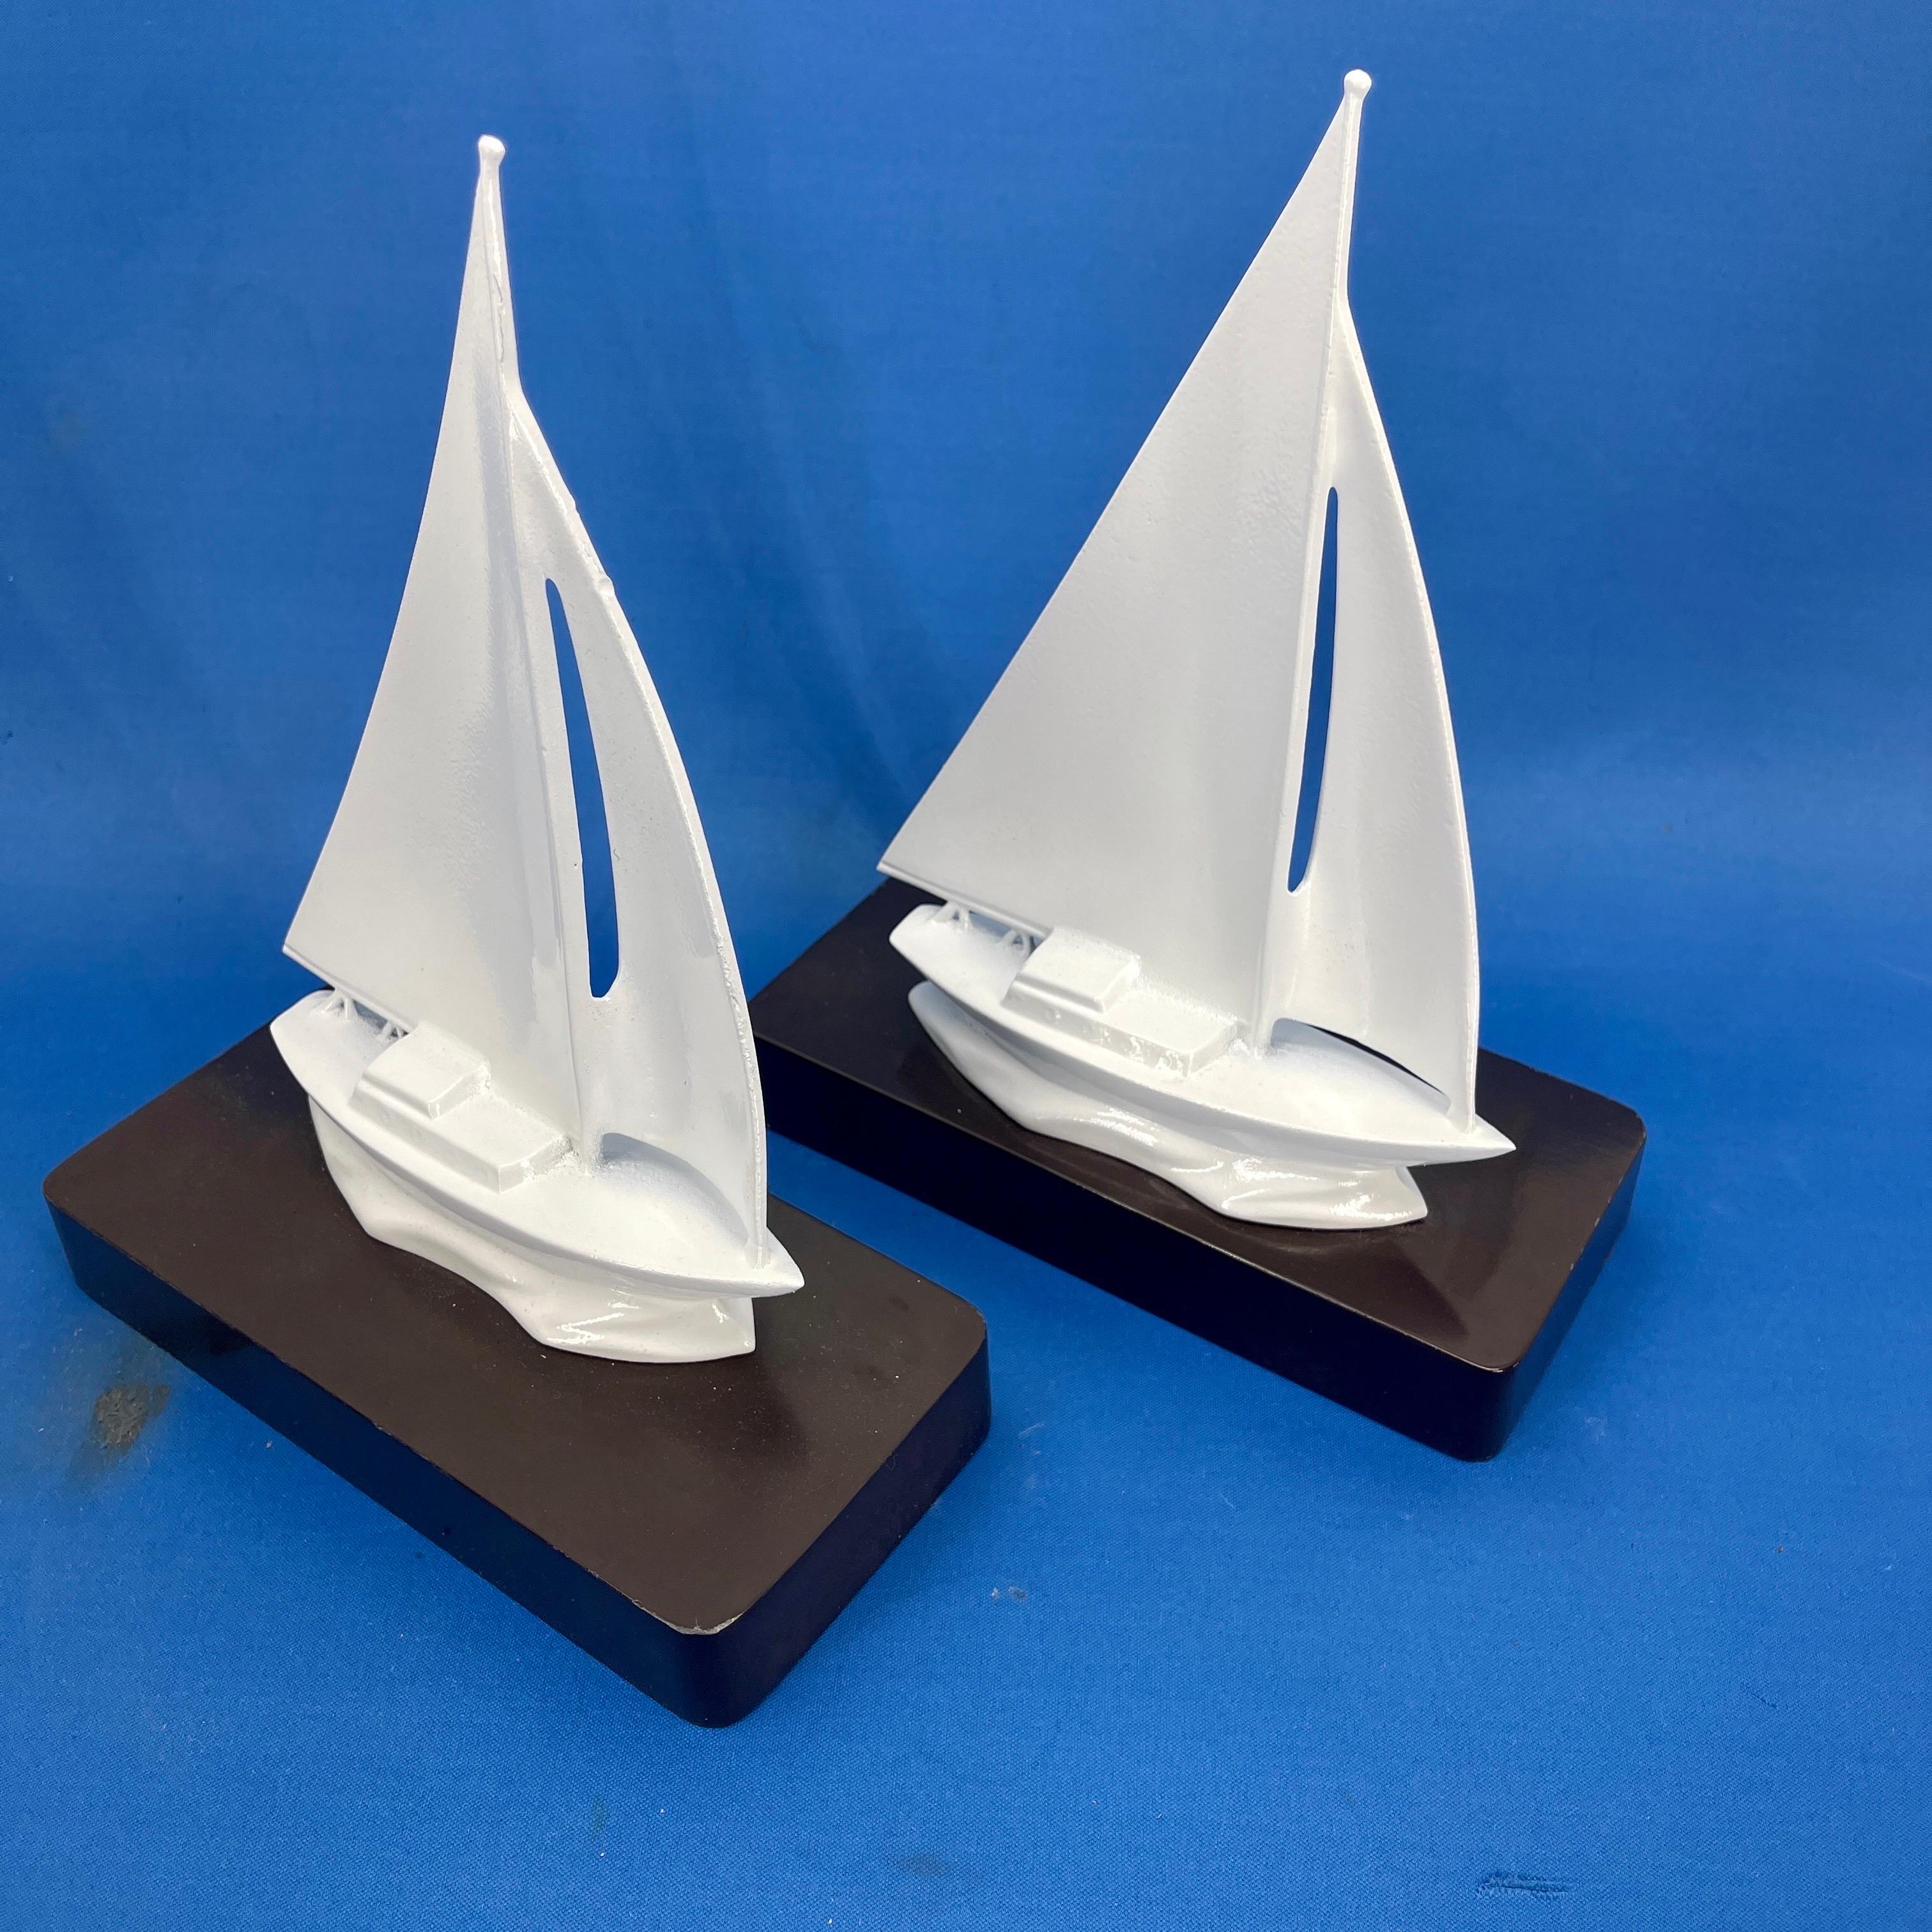 Powder-Coated Creamy White Set of Mid-Century Sailboat Bookends 

Substantial in size and weight, these solid vintage brass newly powder-coated boats are both form and function. Fabulous pair displayed on a bookshelf or desk or standing alone as